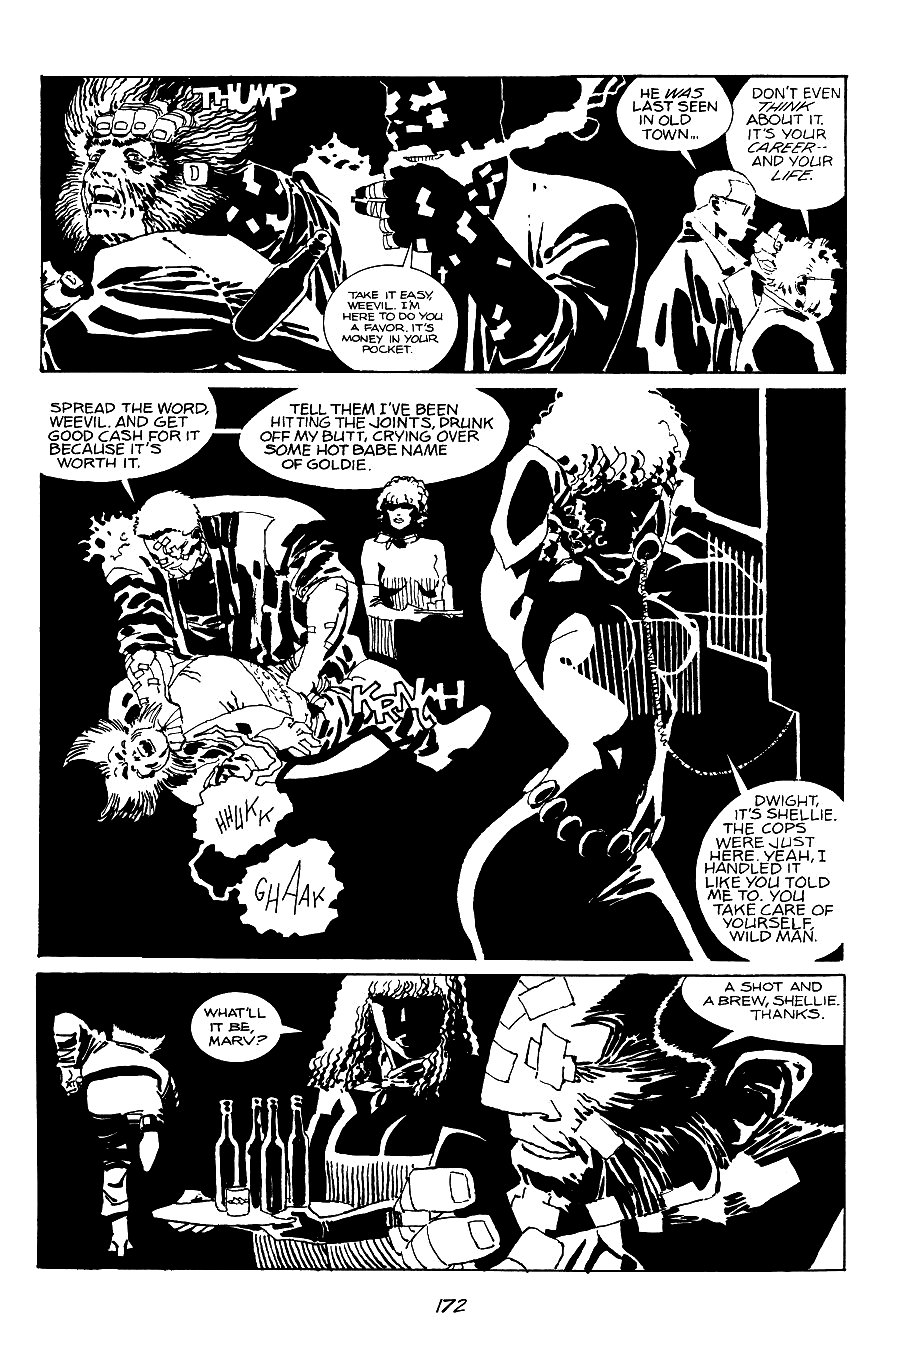 page 172 of sin city 2 the hard goodbye